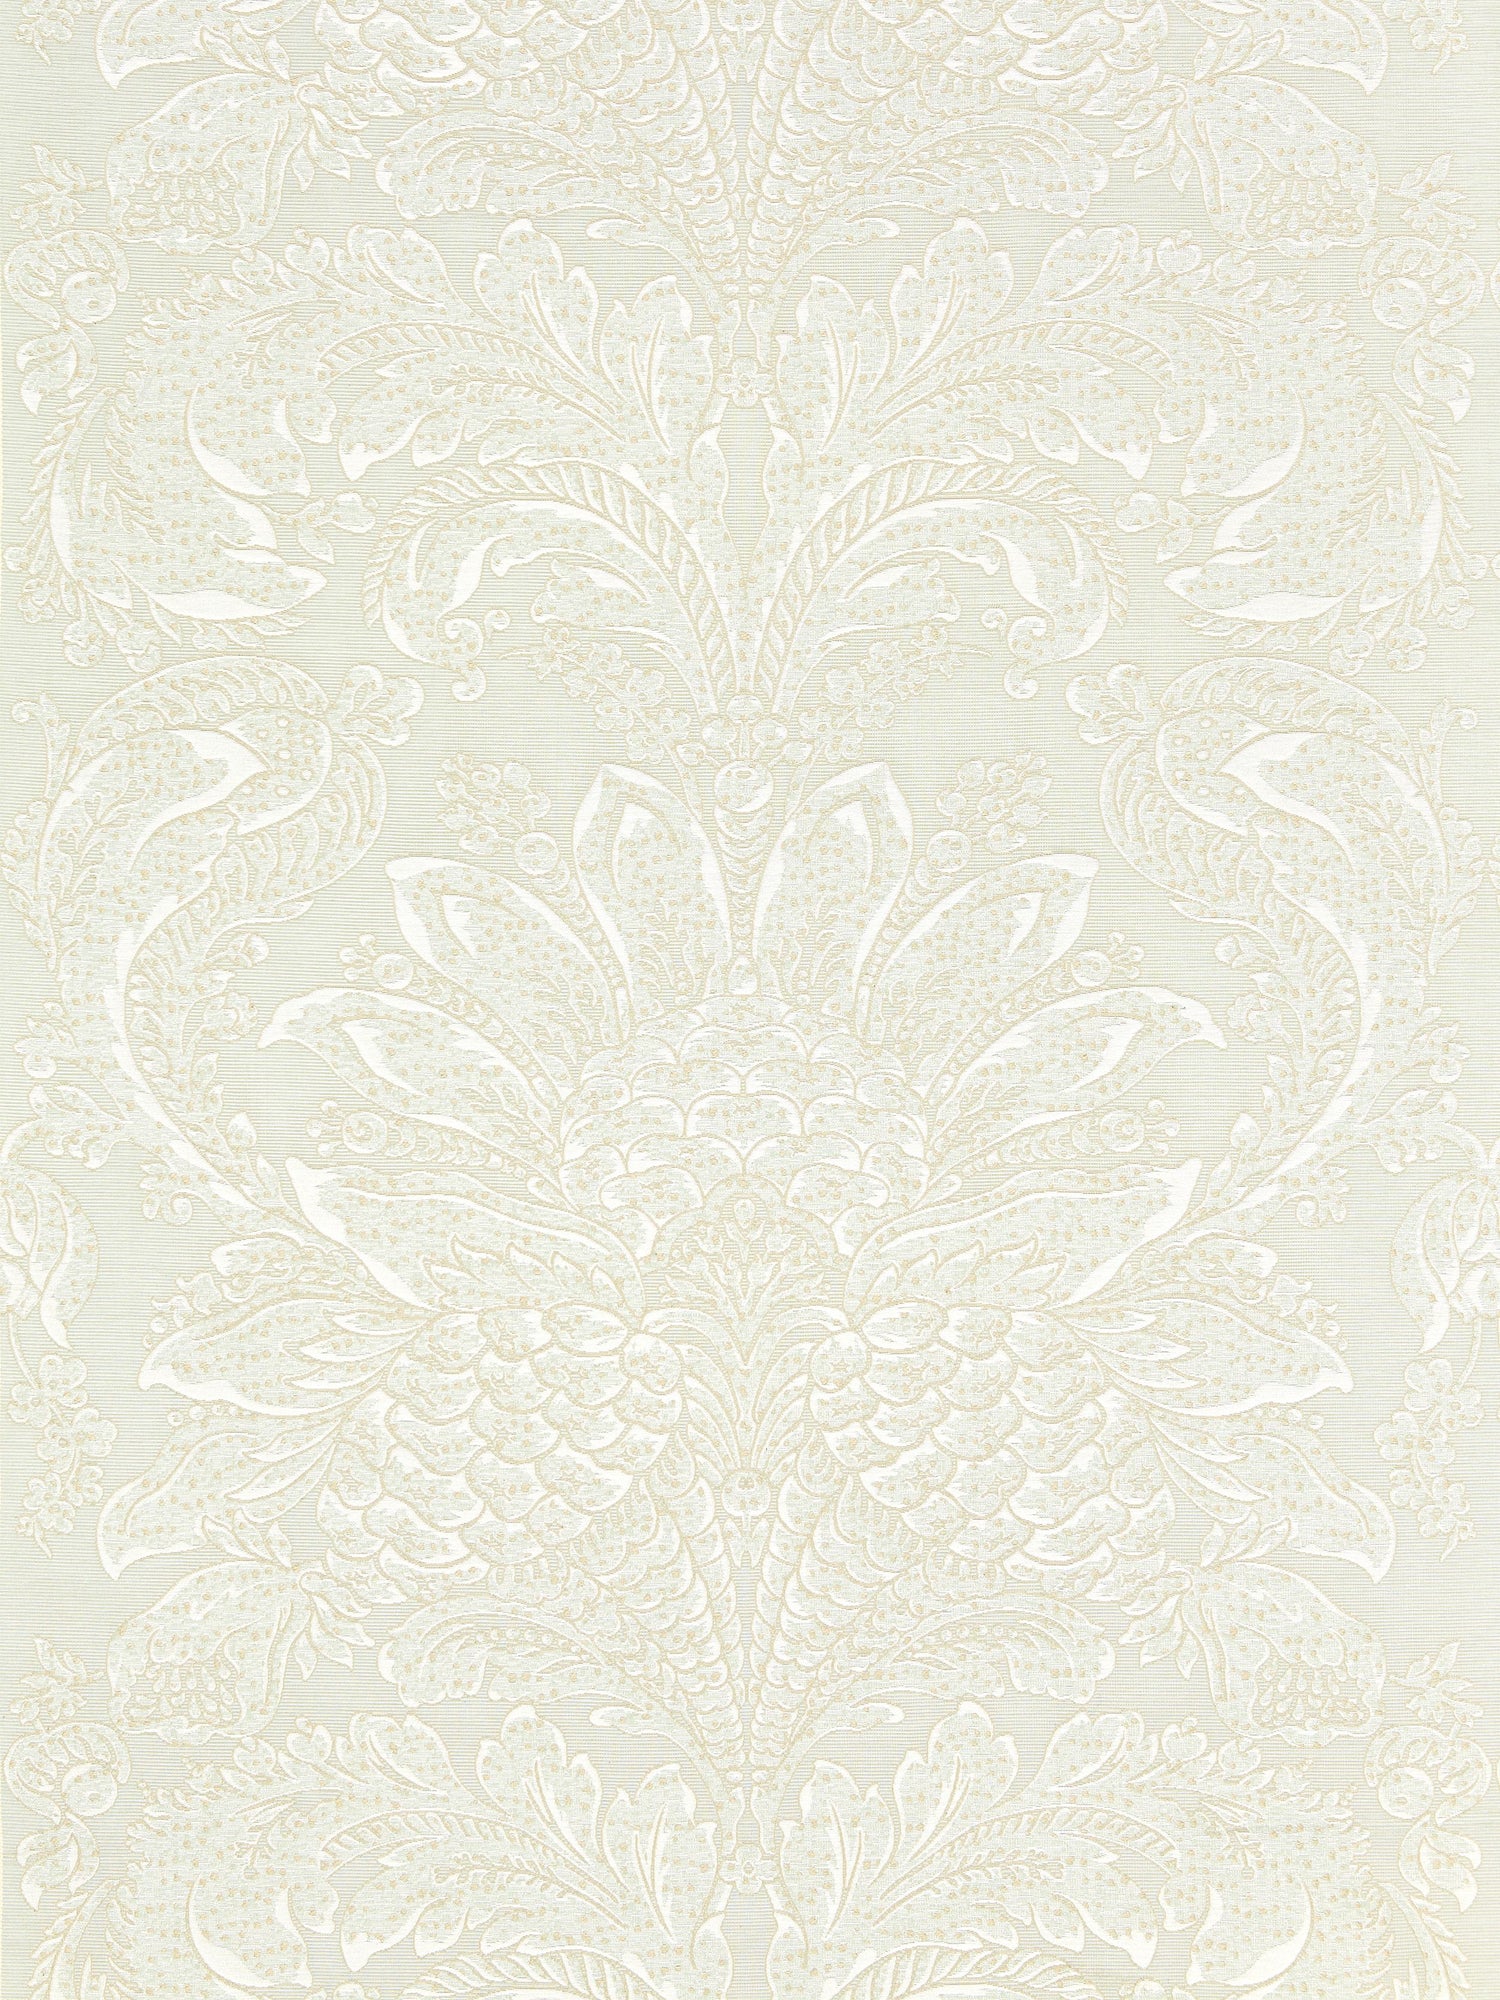 Carlotta Damask fabric in mineral color - pattern number SC 000327081 - by Scalamandre in the Scalamandre Fabrics Book 1 collection